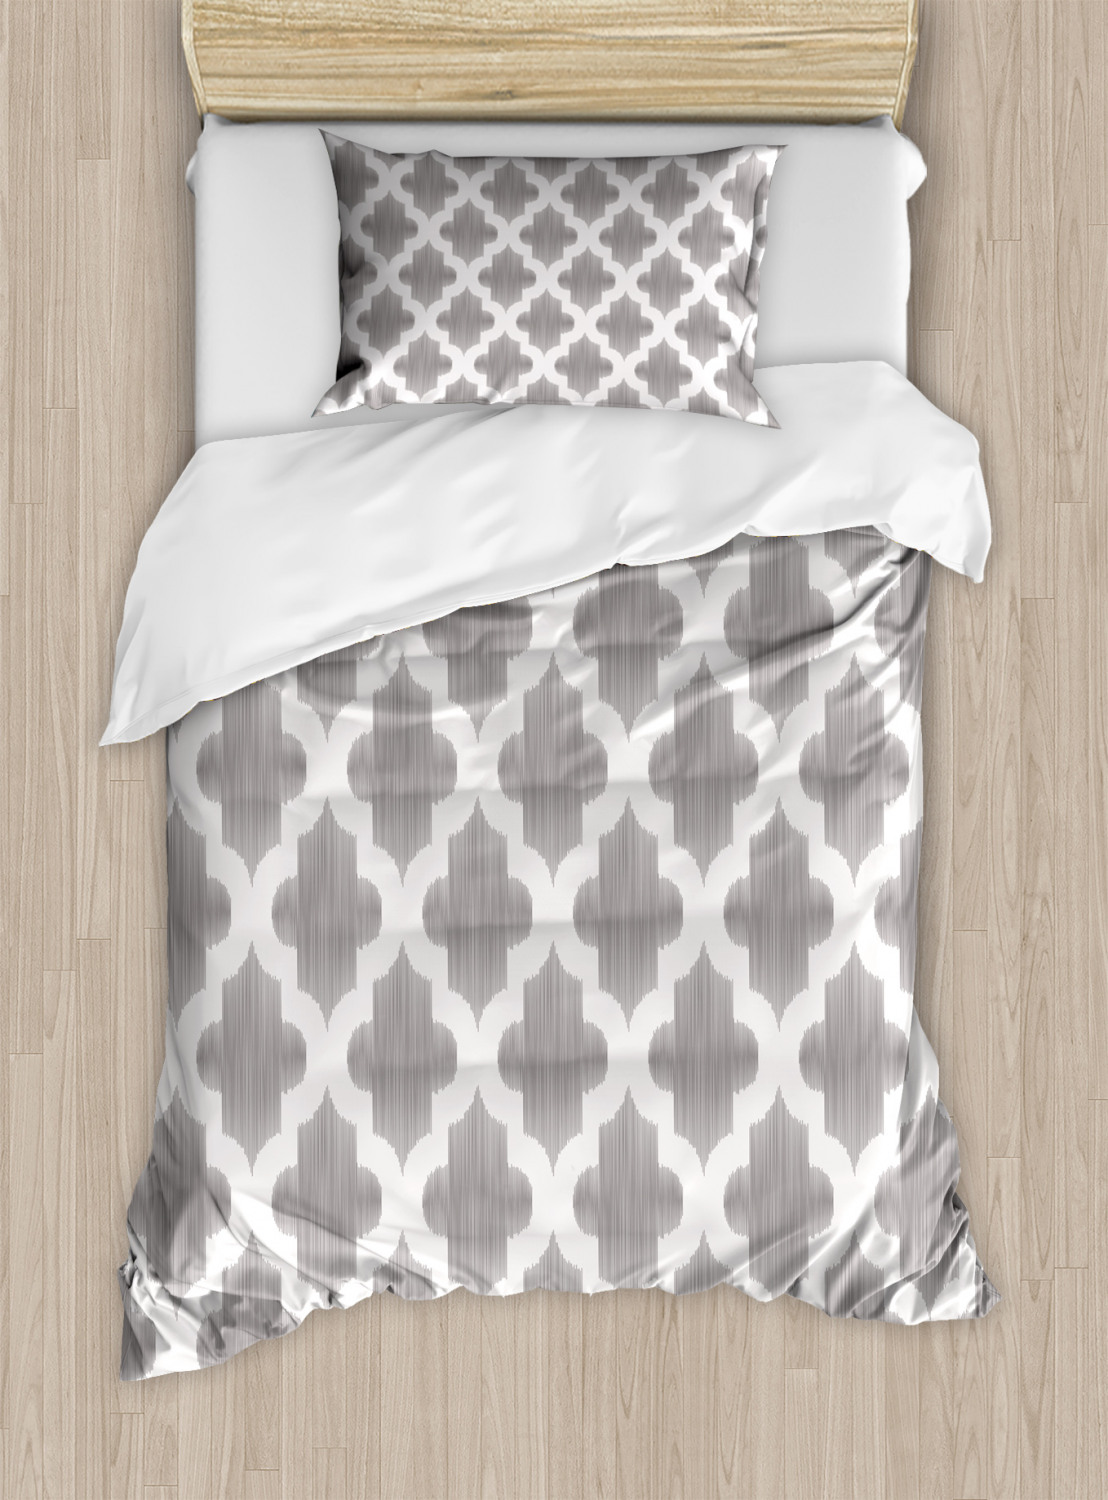 Grey And White Duvet Cover Set With Pillow Shams Geometric Damask